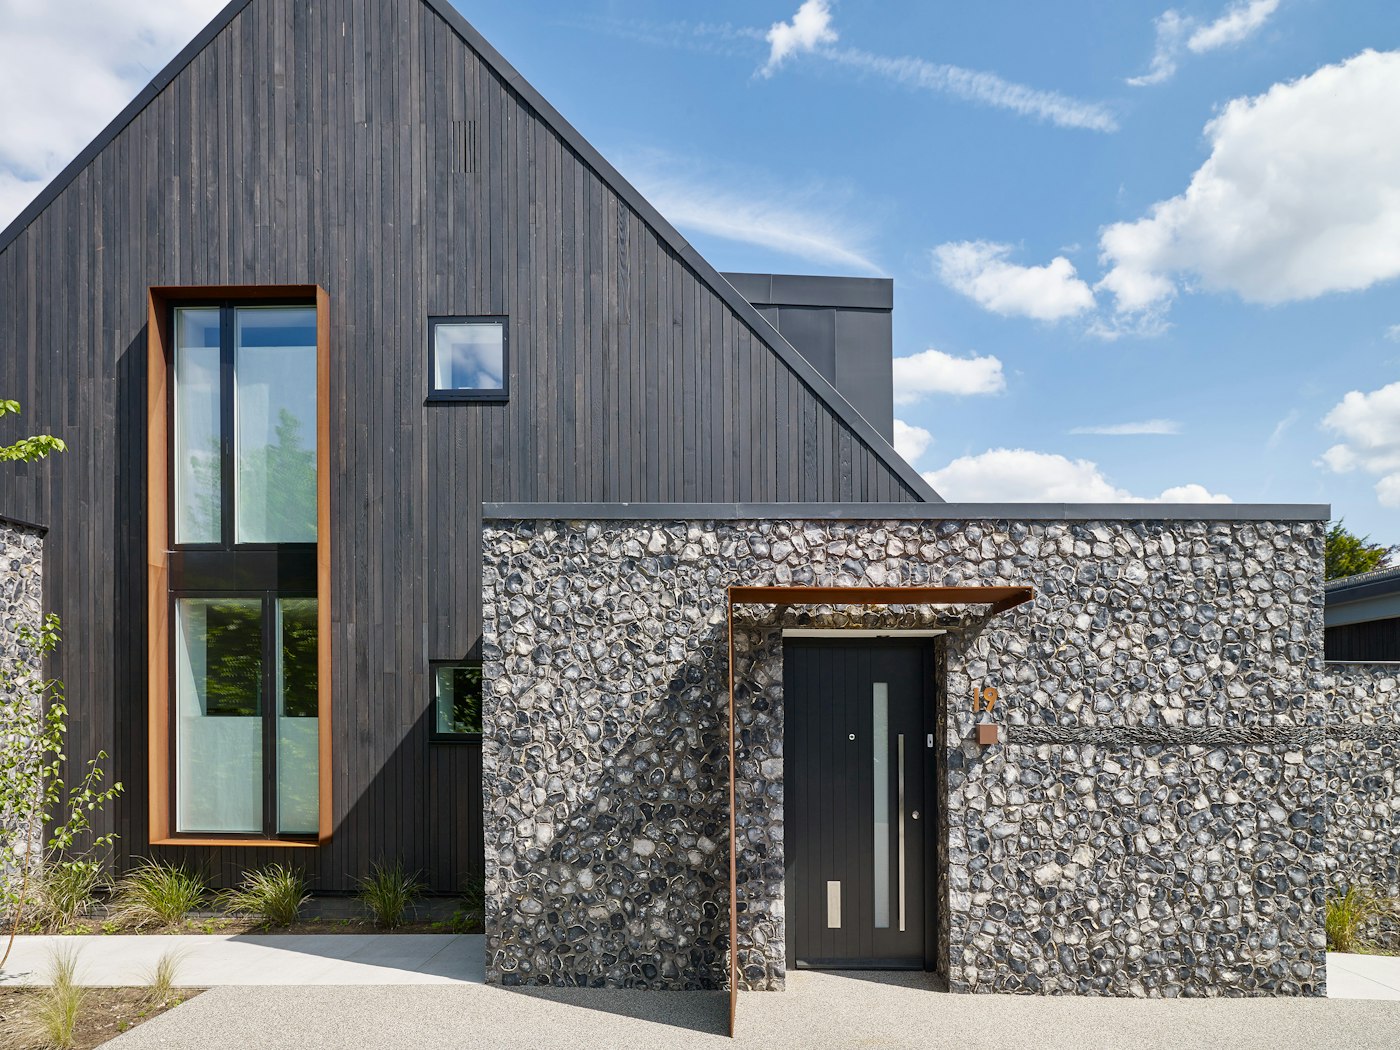 Here the door is highlighted by stunning flint work and the rest of the building includes burnt cedar cladding